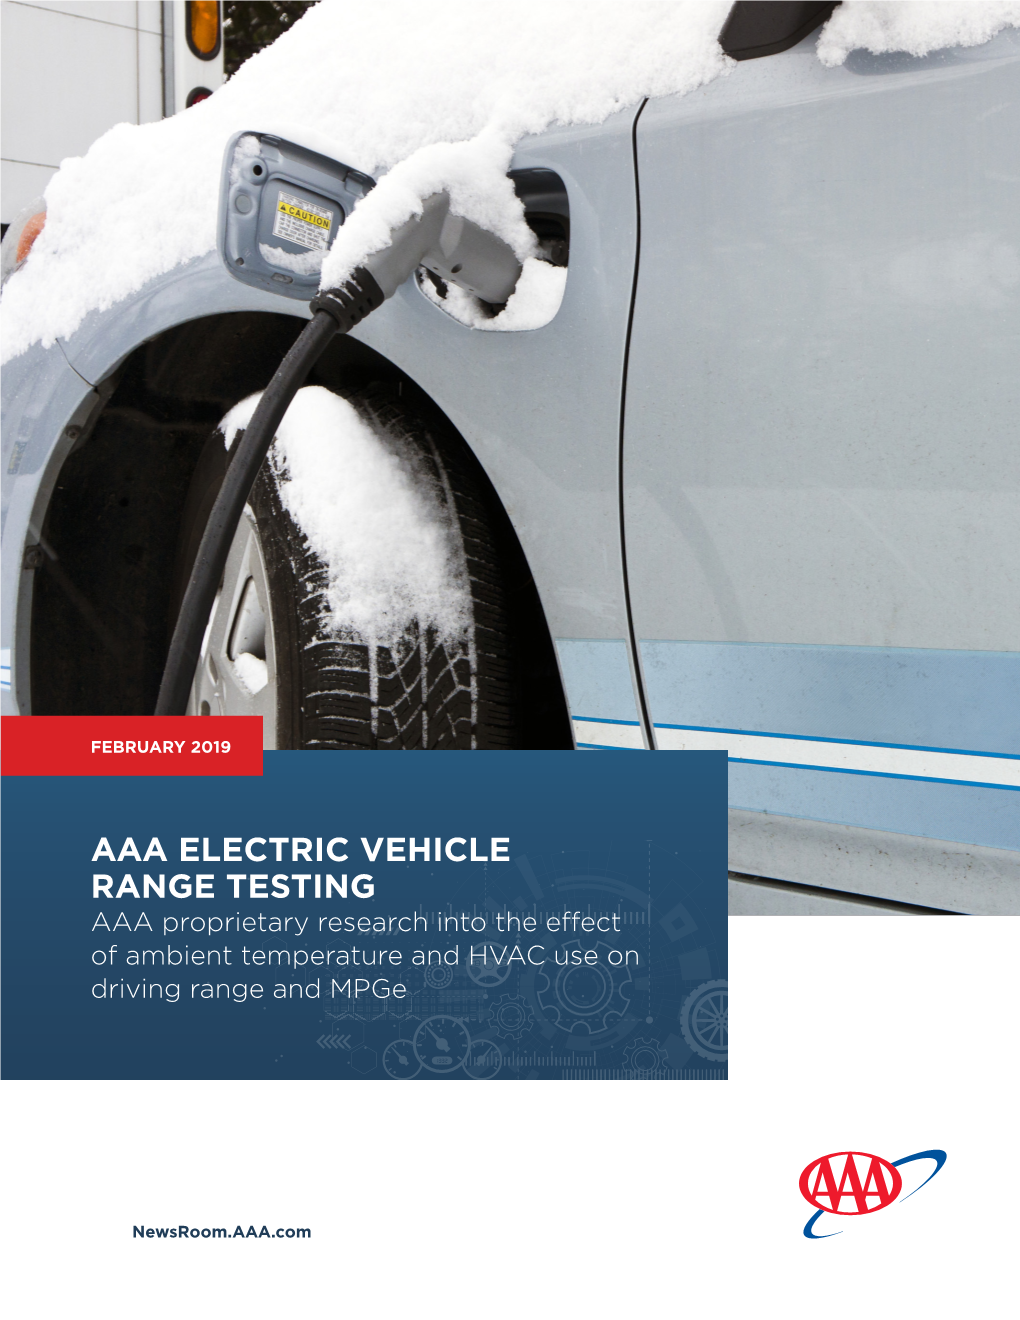 AAA ELECTRIC VEHICLE RANGE TESTING AAA Proprietary Research Into the Effect of Ambient Temperature and HVAC Use on Driving Range and Mpge